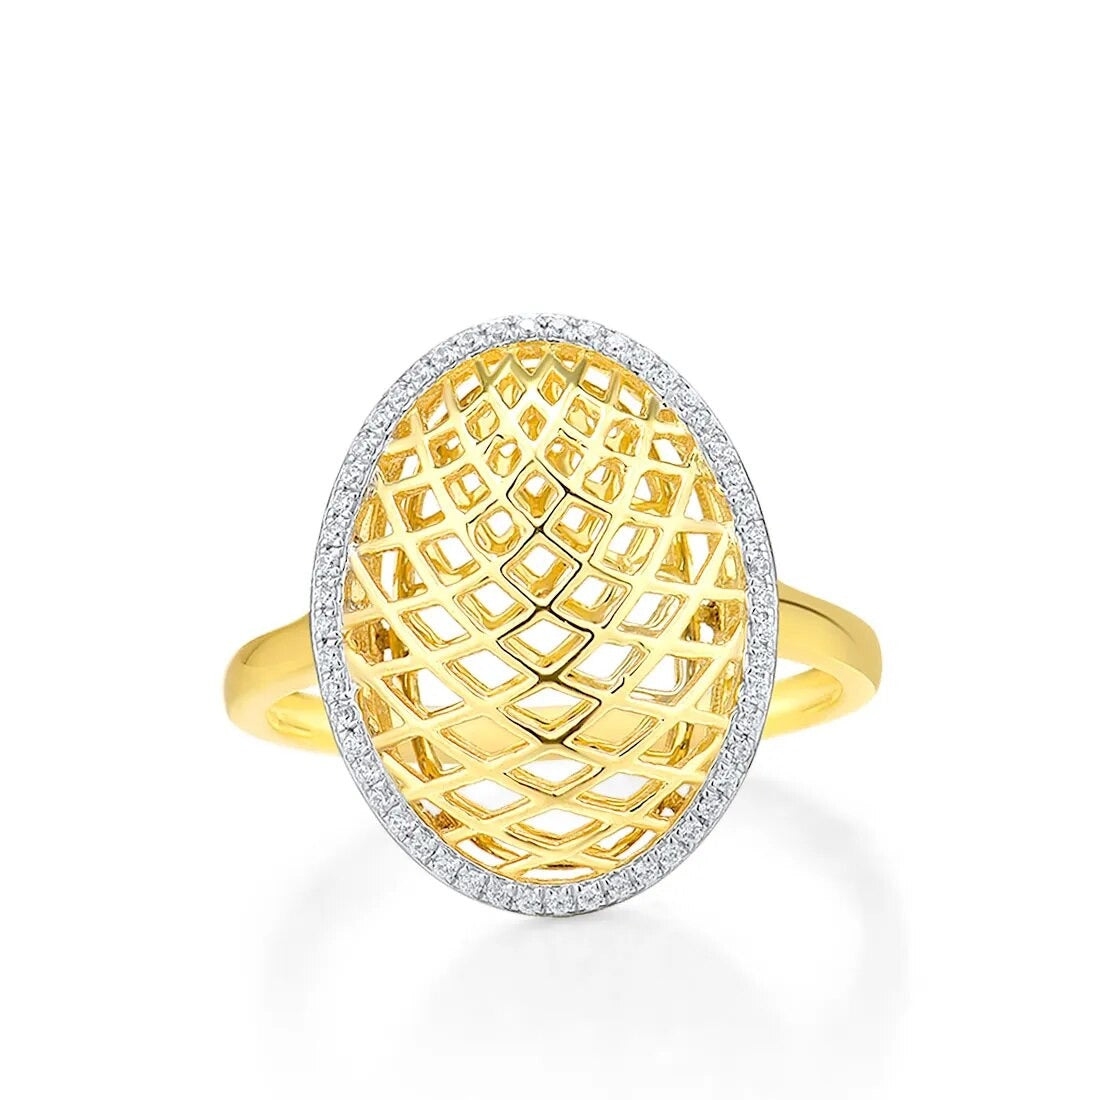 Luxury Yellow Gold Diamond Rings. Oval Shaped 14K Gold Rings.